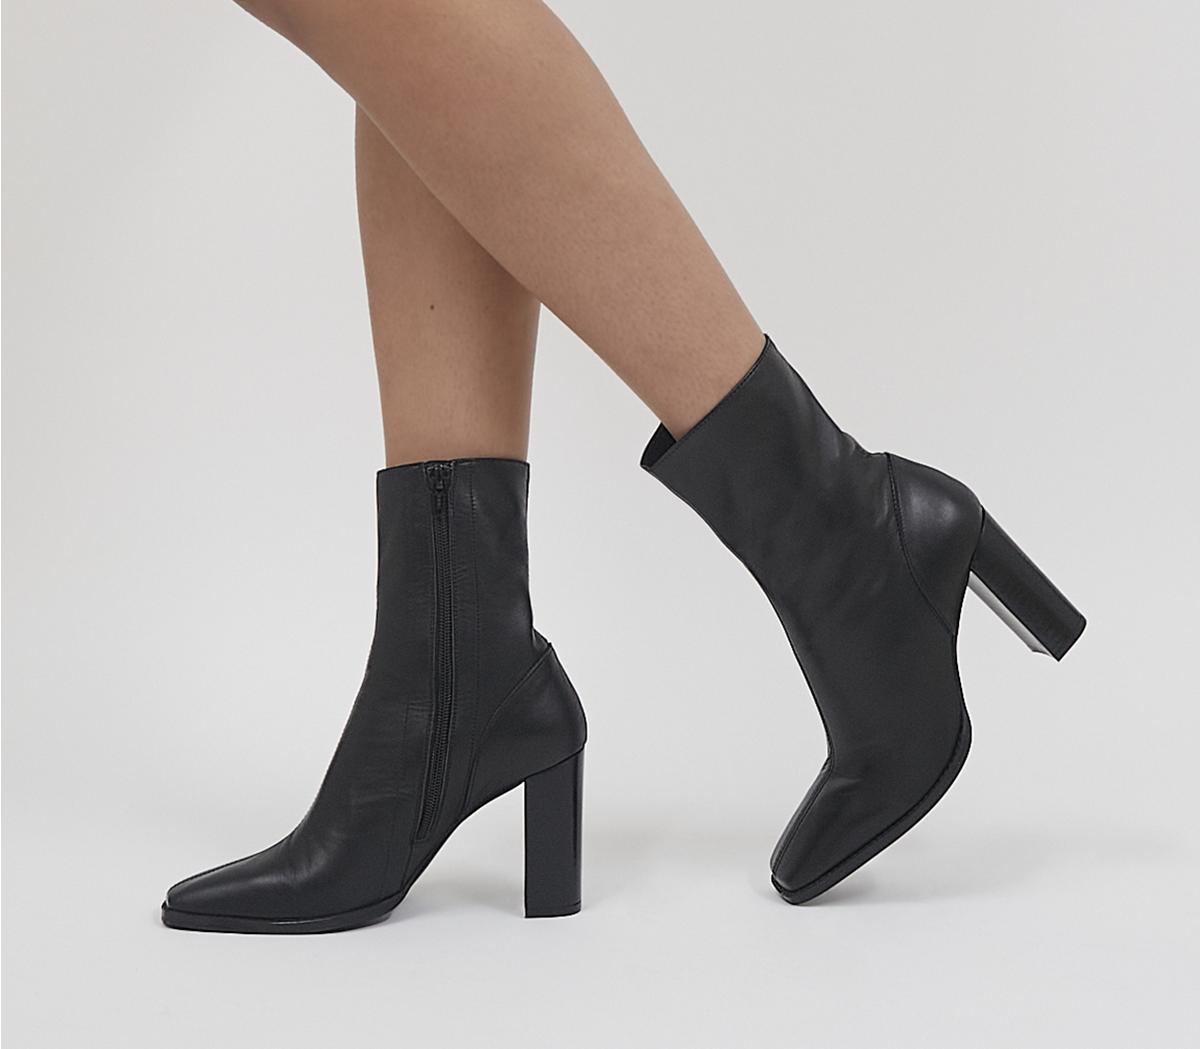 OFFICEAmple High Square Toe Ankle BootsBlack Leather